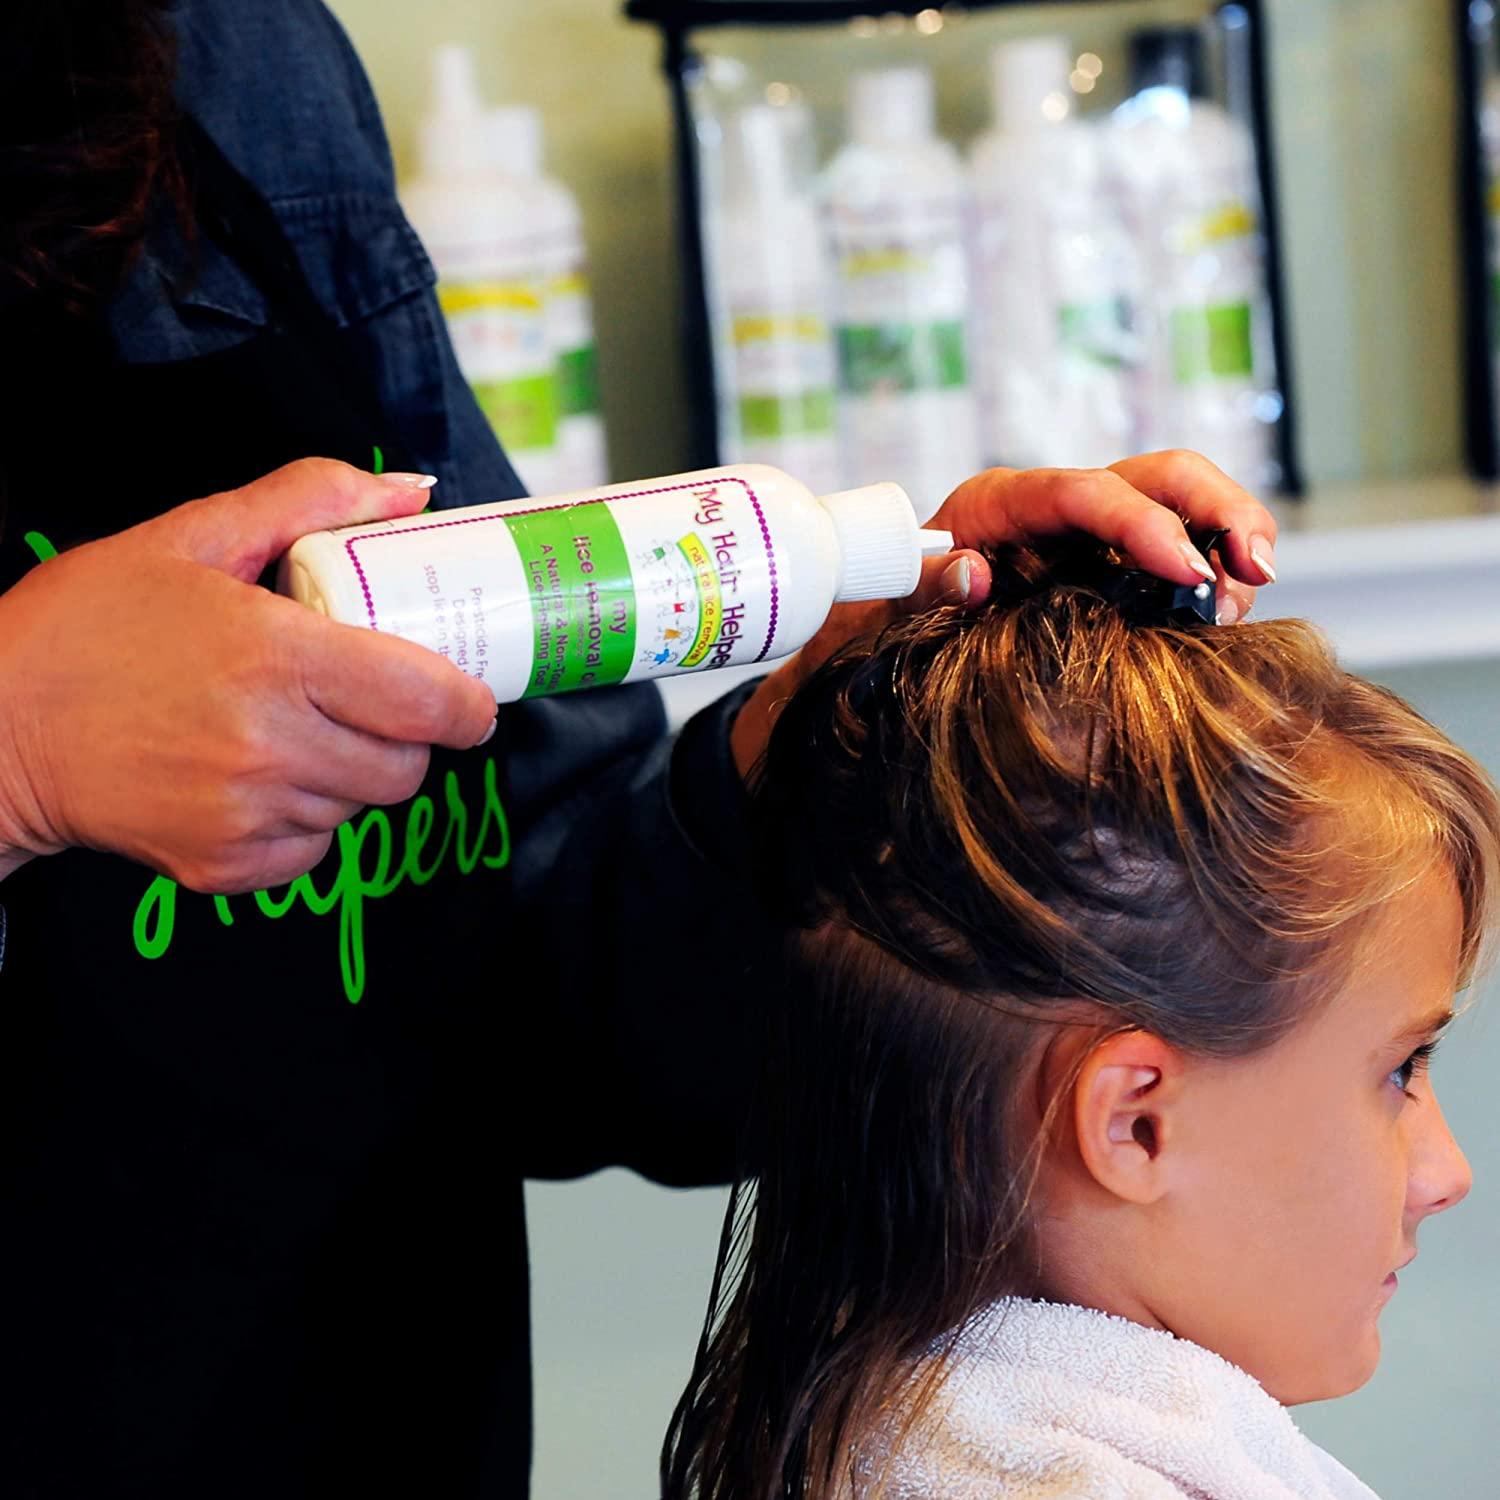 Dimethicone Oil for Lice Removal Safe Non-Toxic Treatment Kills Lice and  Their Eggs 8 fl Ounces Treats 1-3 People